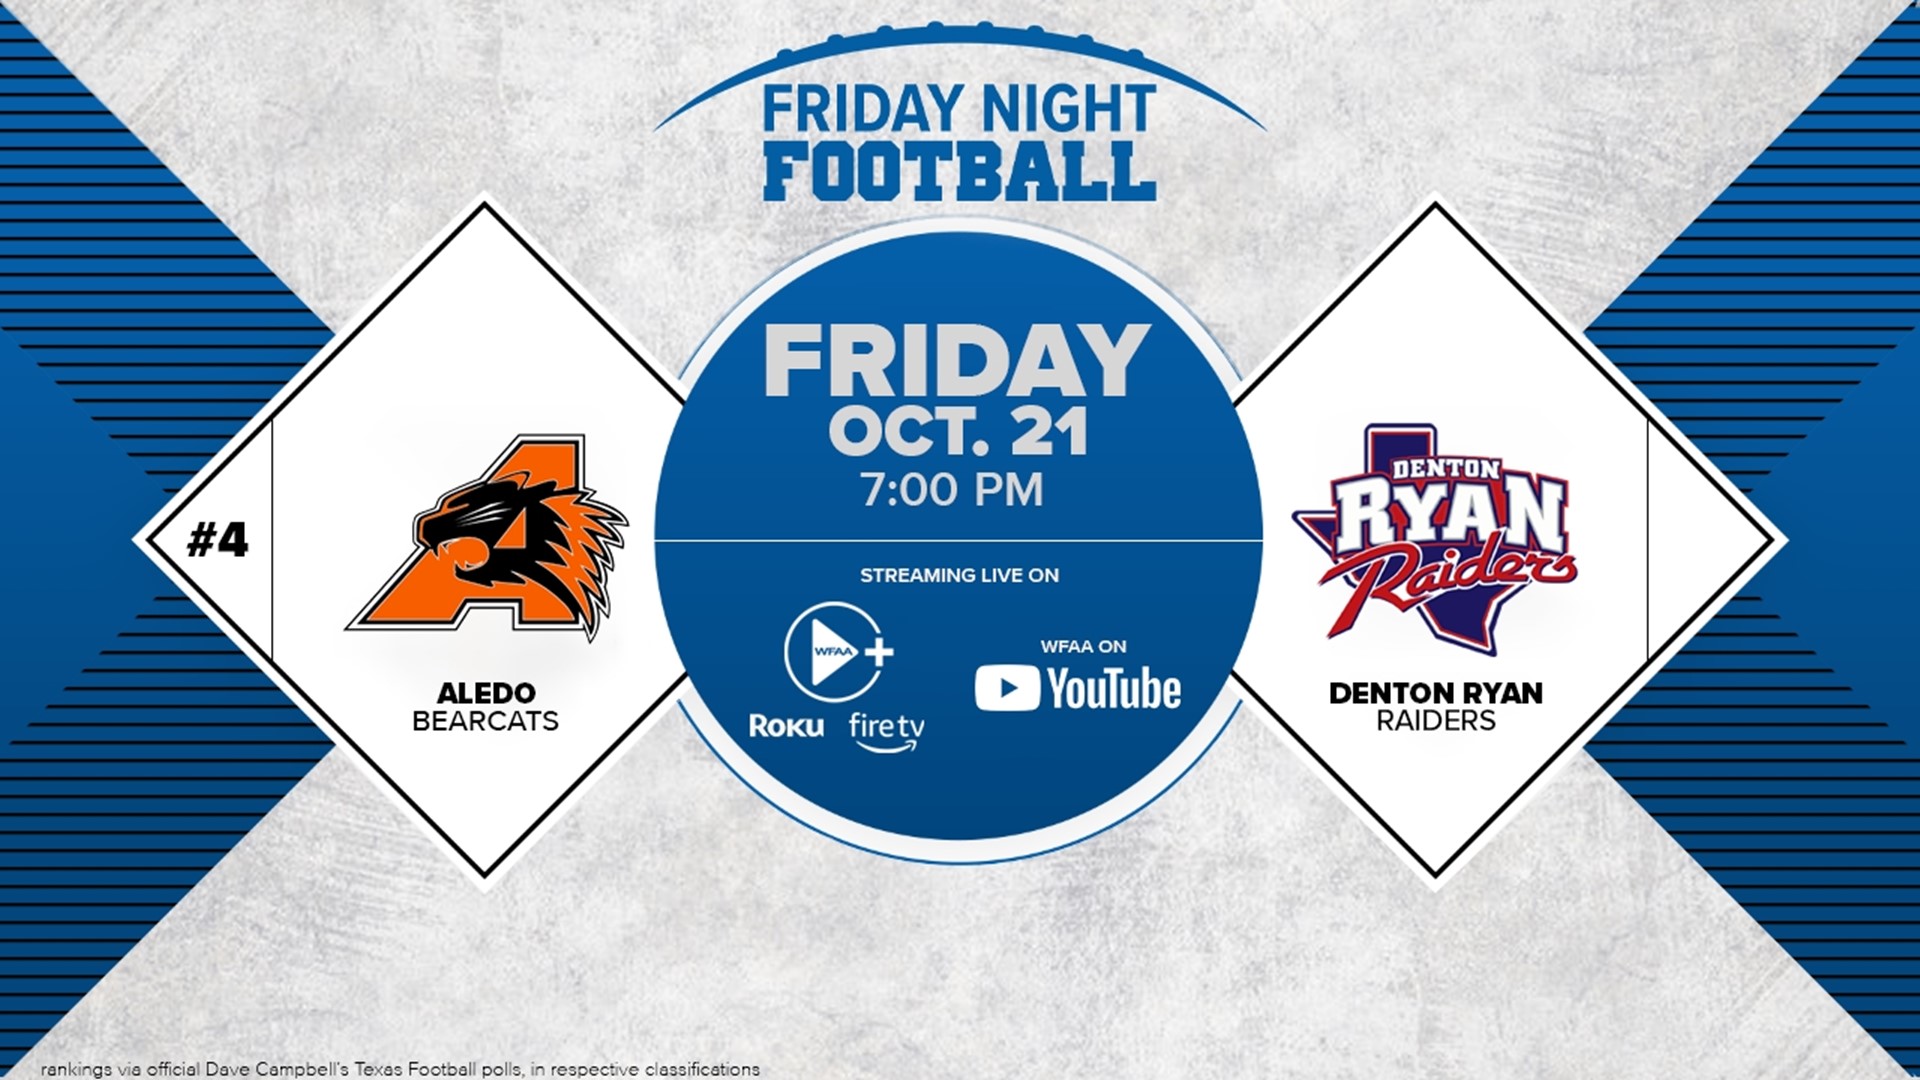 #4 Aledo visits Denton Ryan in a clash of state powers, this week on Friday Night Football